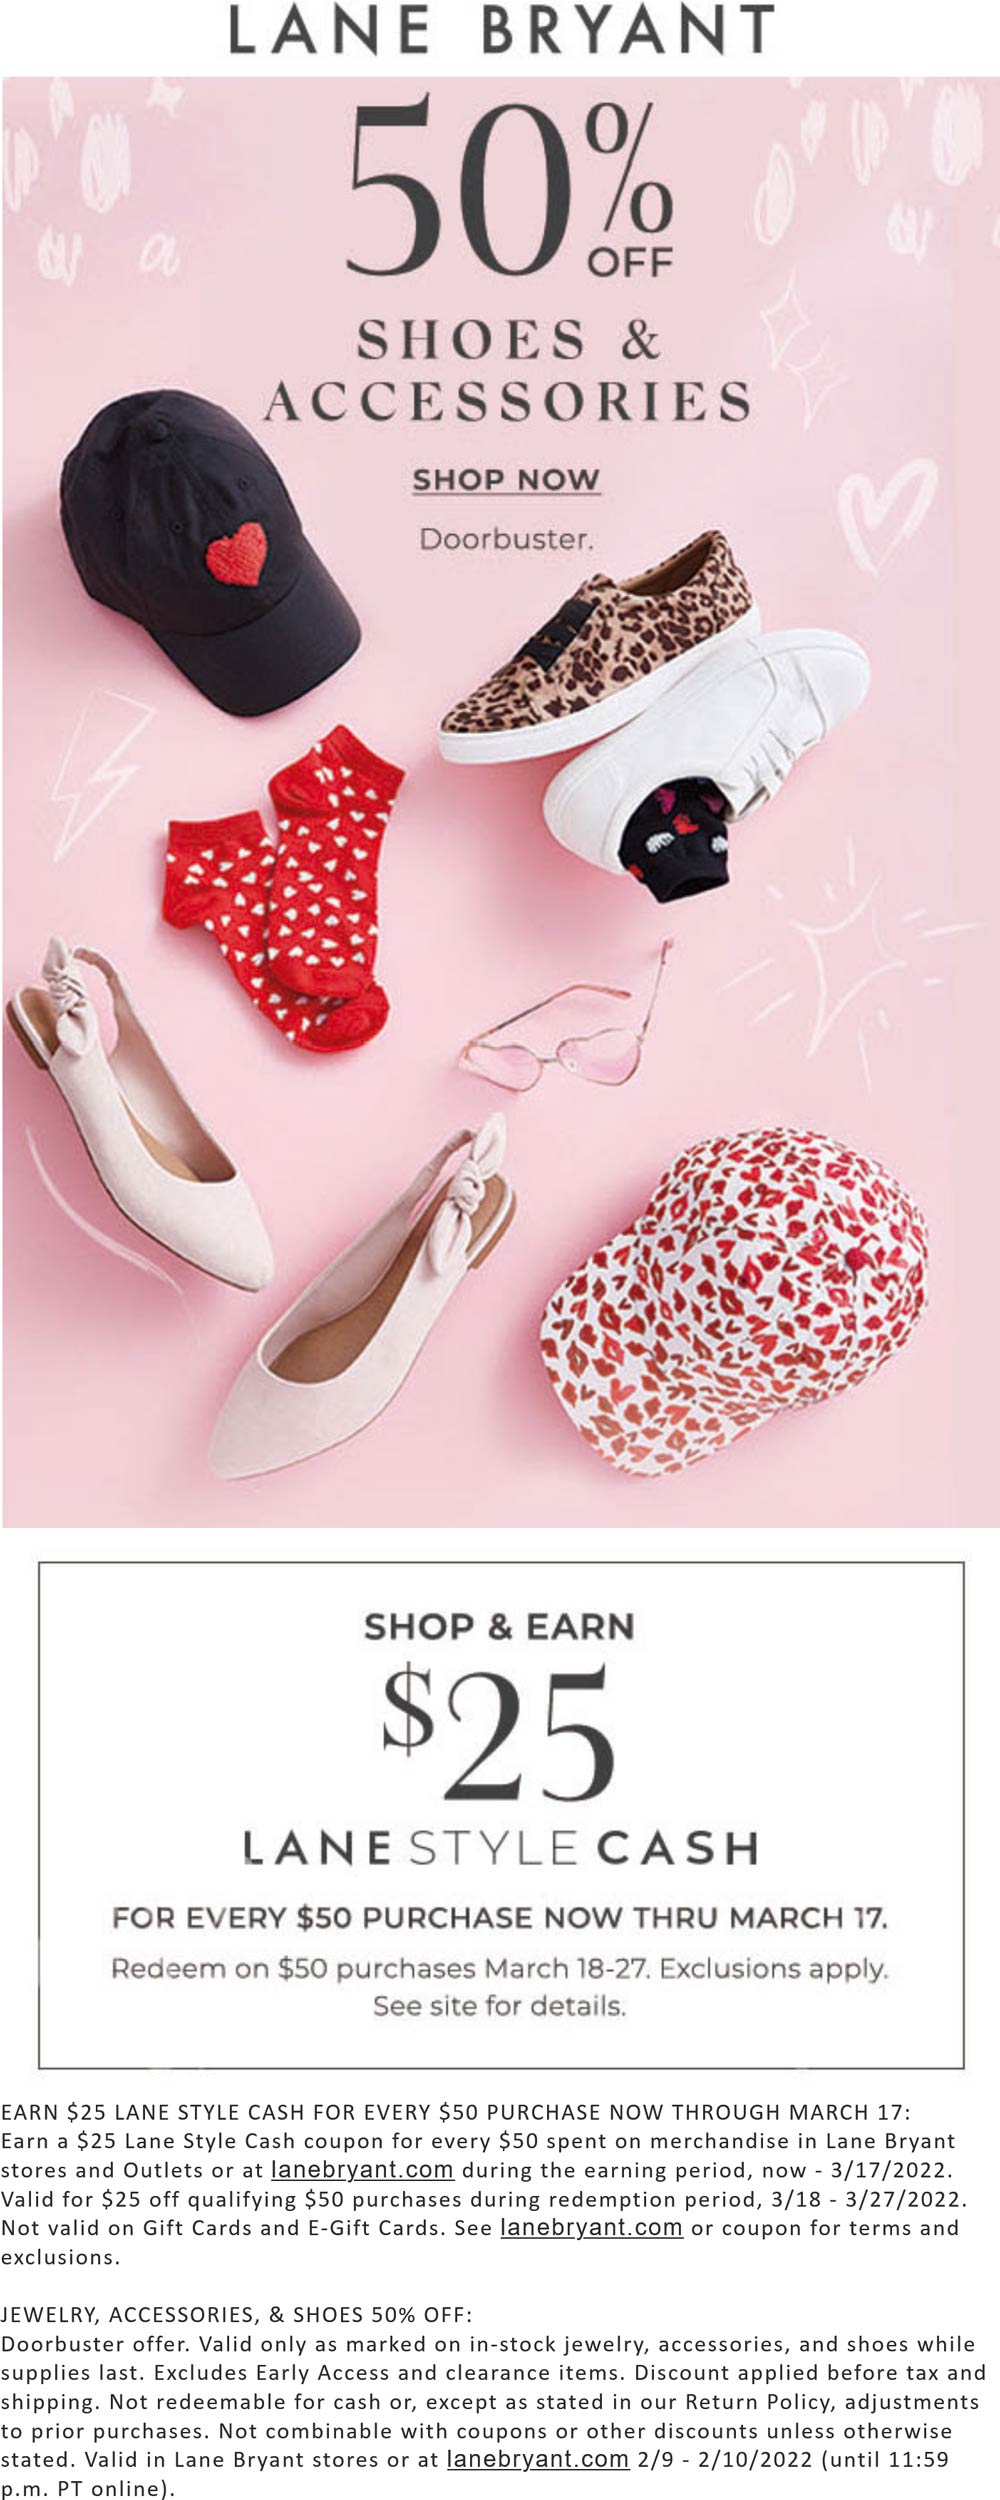 Lane Bryant stores Coupon  50% off shoes accessories & jewelry today at Lane Bryant, ditto online #lanebryant 